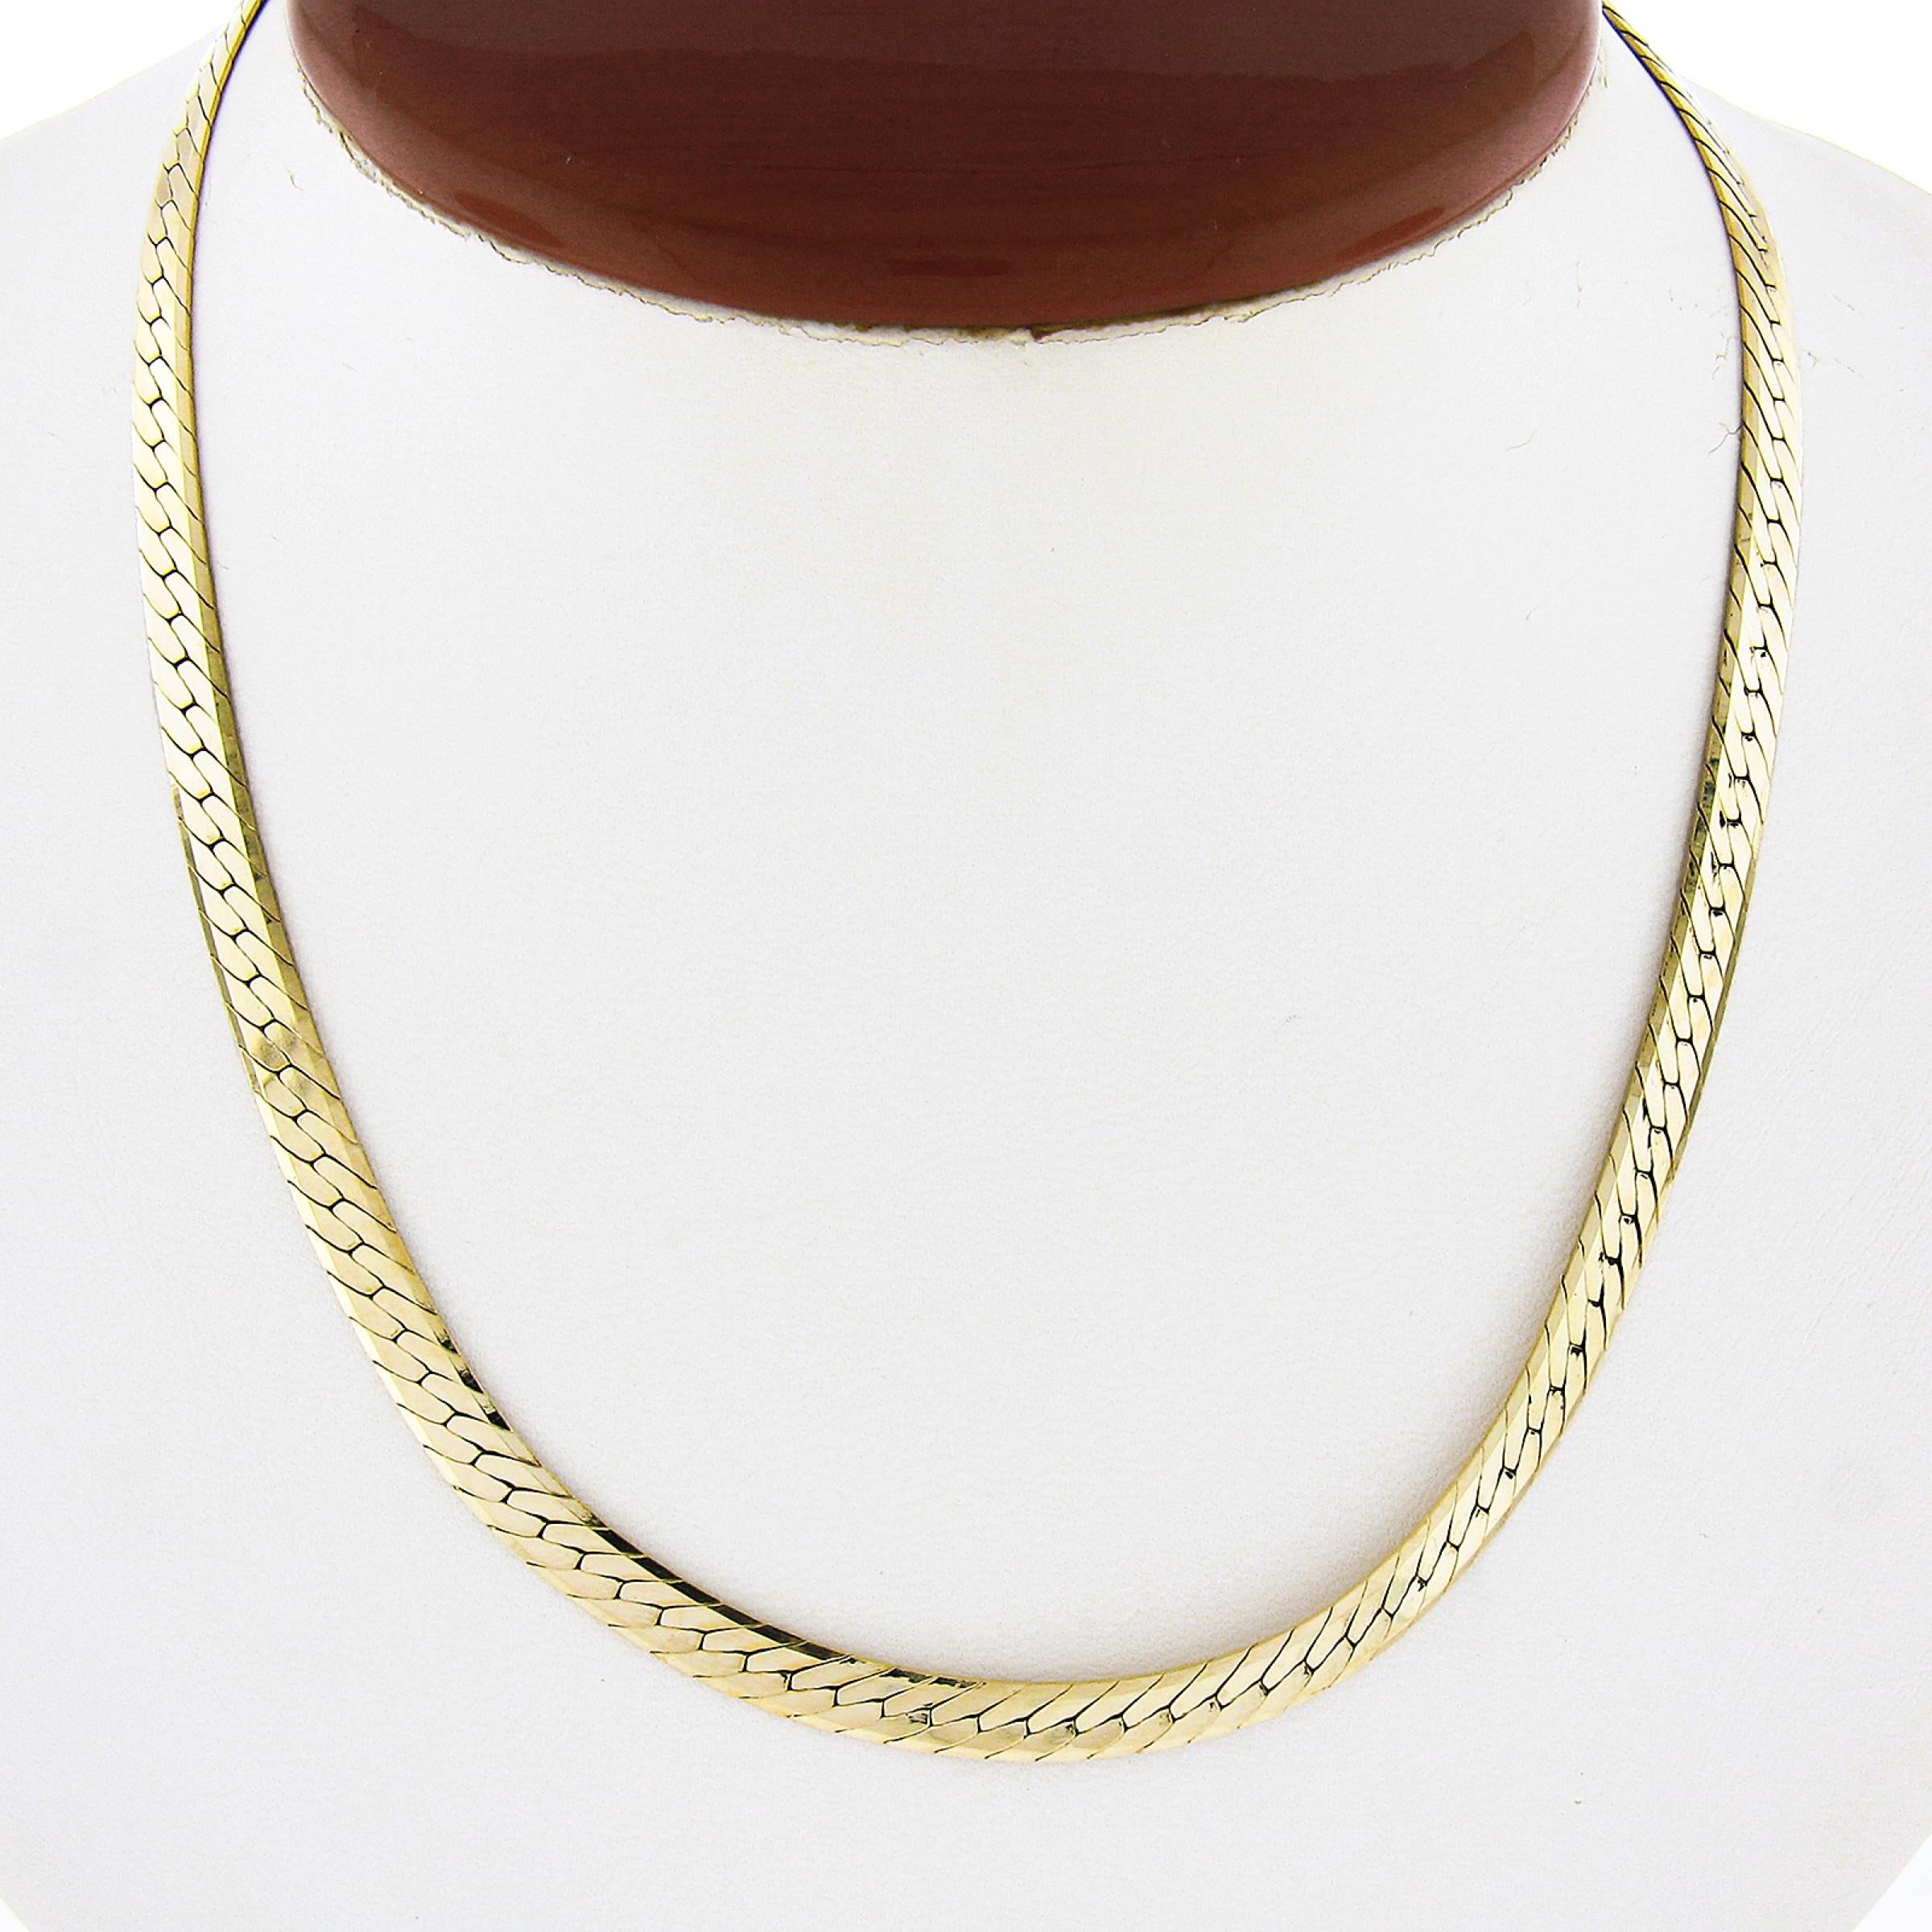 This well made chain necklace was crafted in Italy from solid 14k yellow gold and features a thick, flat, herringbone link with a high-polished finish throughout that gives this piece a very attractive and shiny look. The chain measures 16 inches in